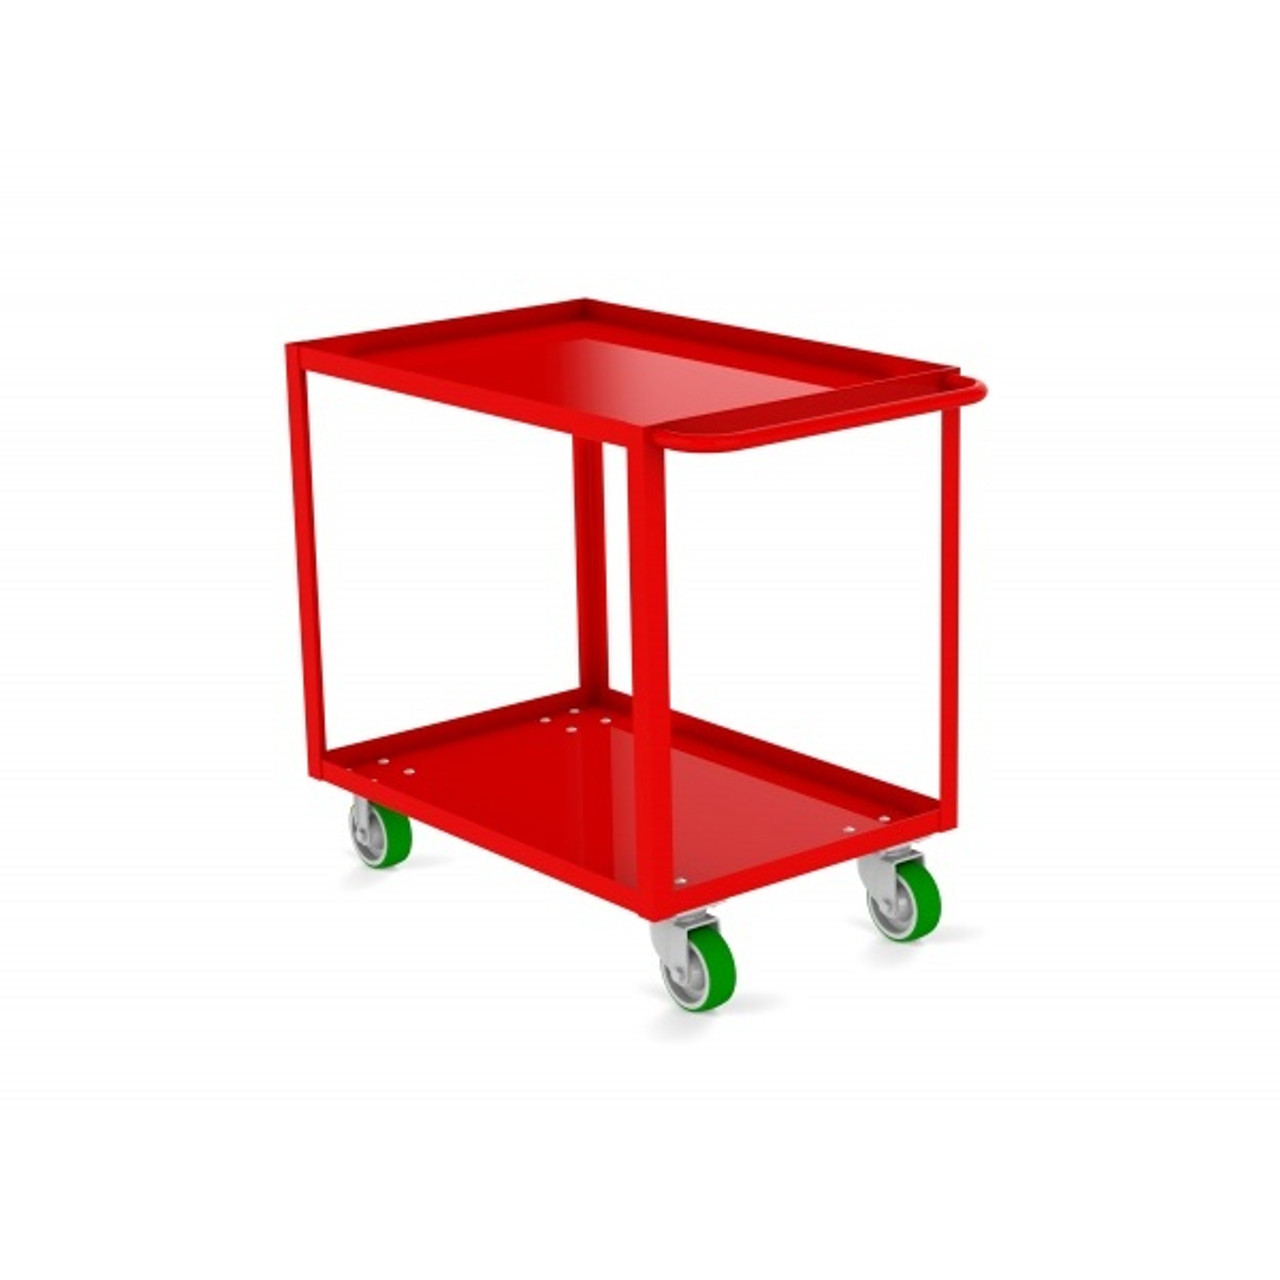 Valley Craft Two Shelf 24 x 36" Utility Cart, Red with Poly Casters (CALL FOR BEST PRICING)